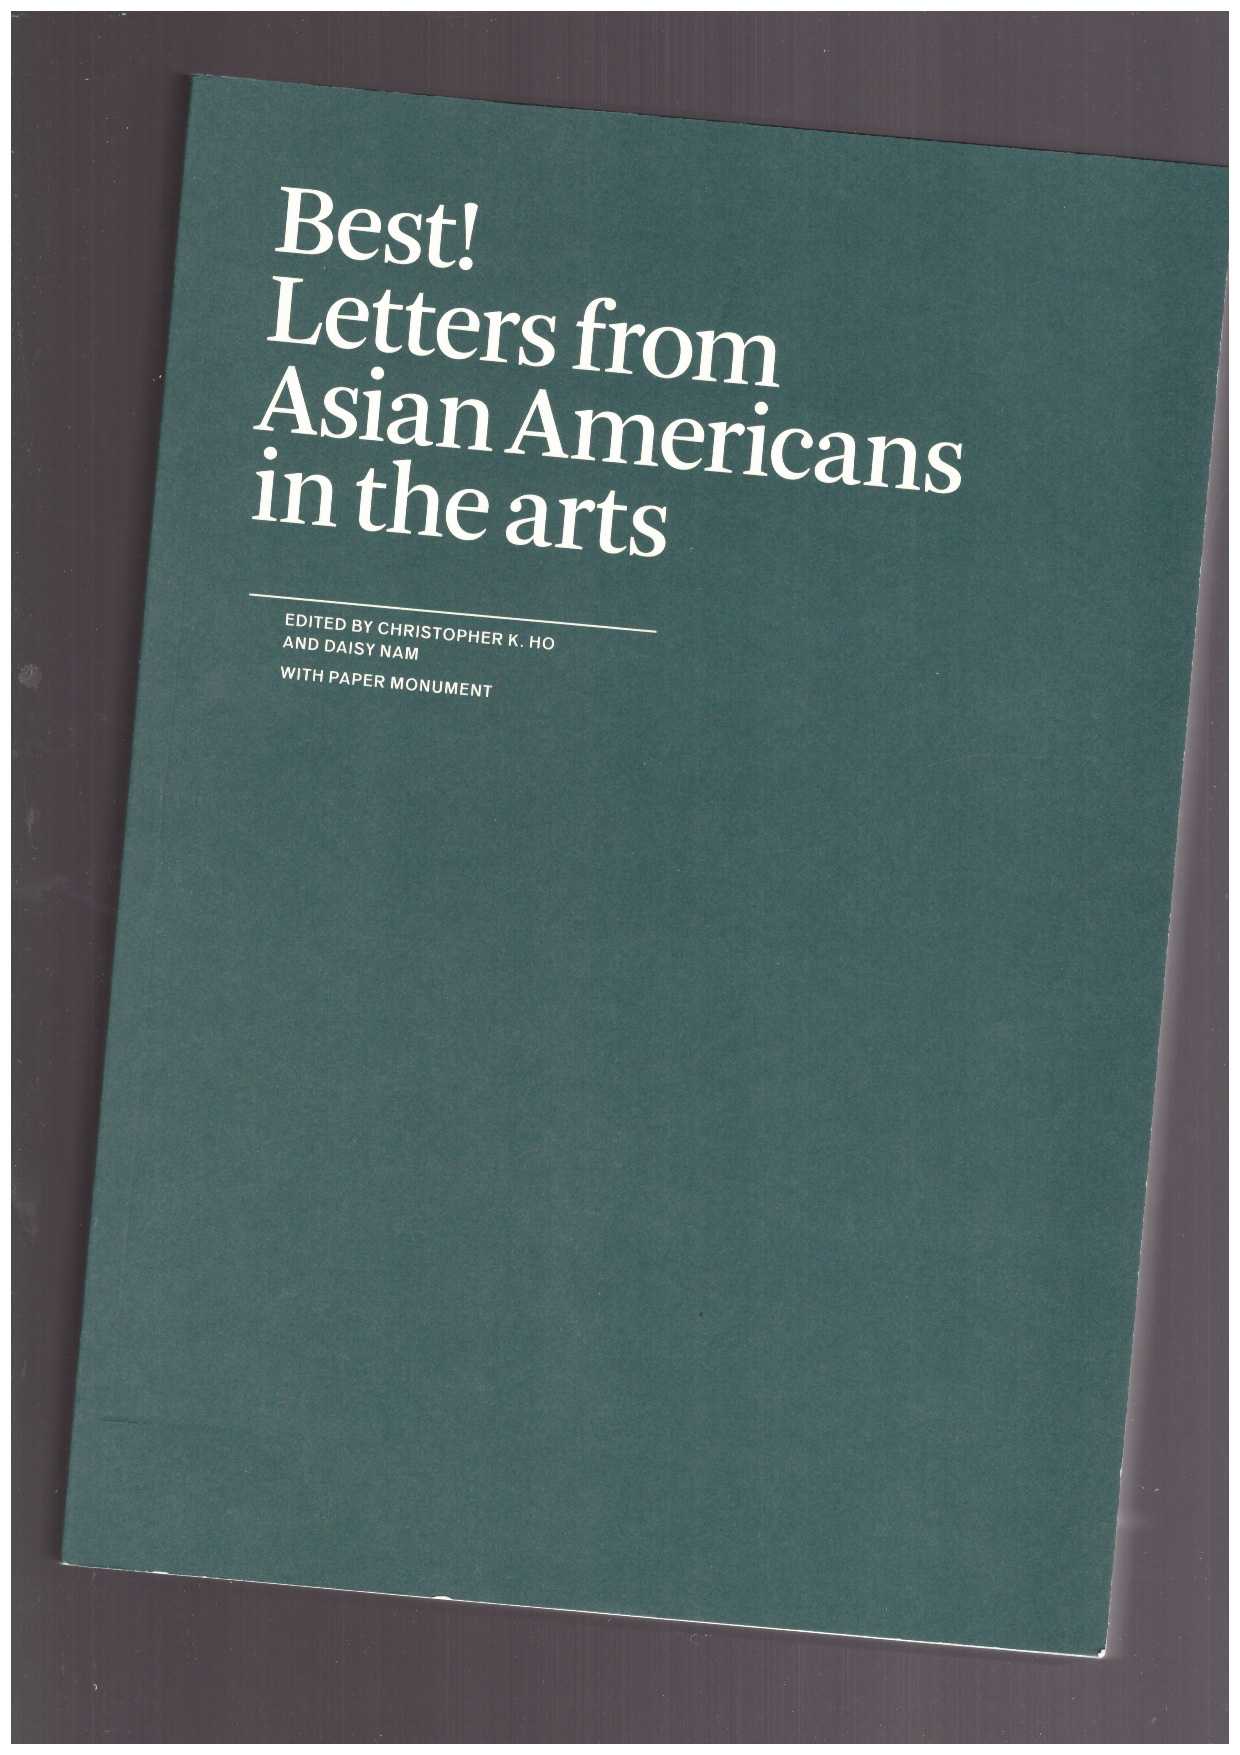 HO, Christopher K.; NAM, Daisy (eds.) - Best! Letters from Asian Americans in the arts